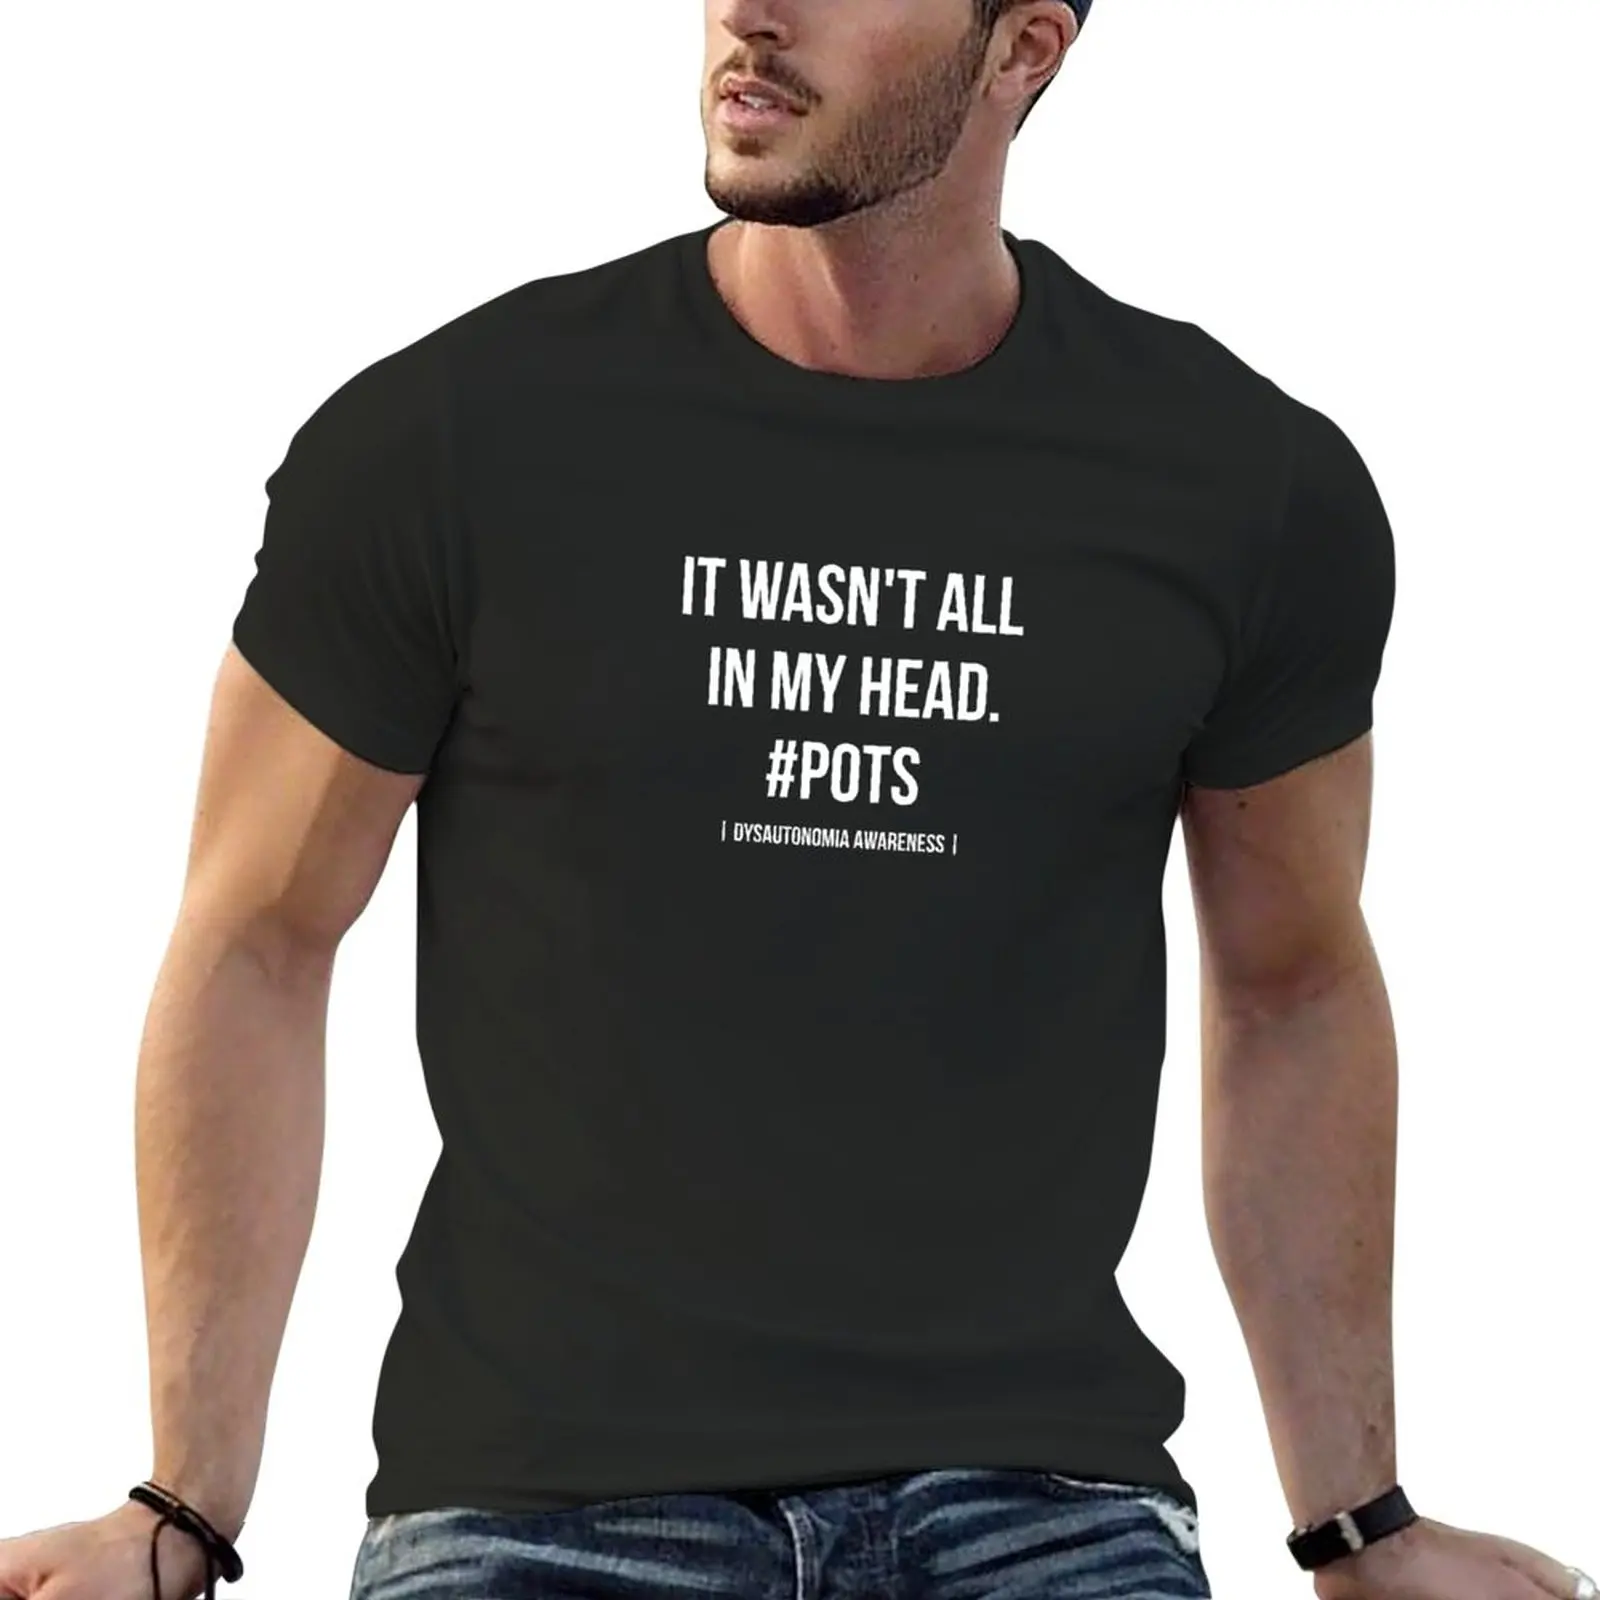 

It Wasn't All In My Head Dysautonomia Awareness T-Shirt quick drying t-shirt plus size tops T-shirts for men cotton